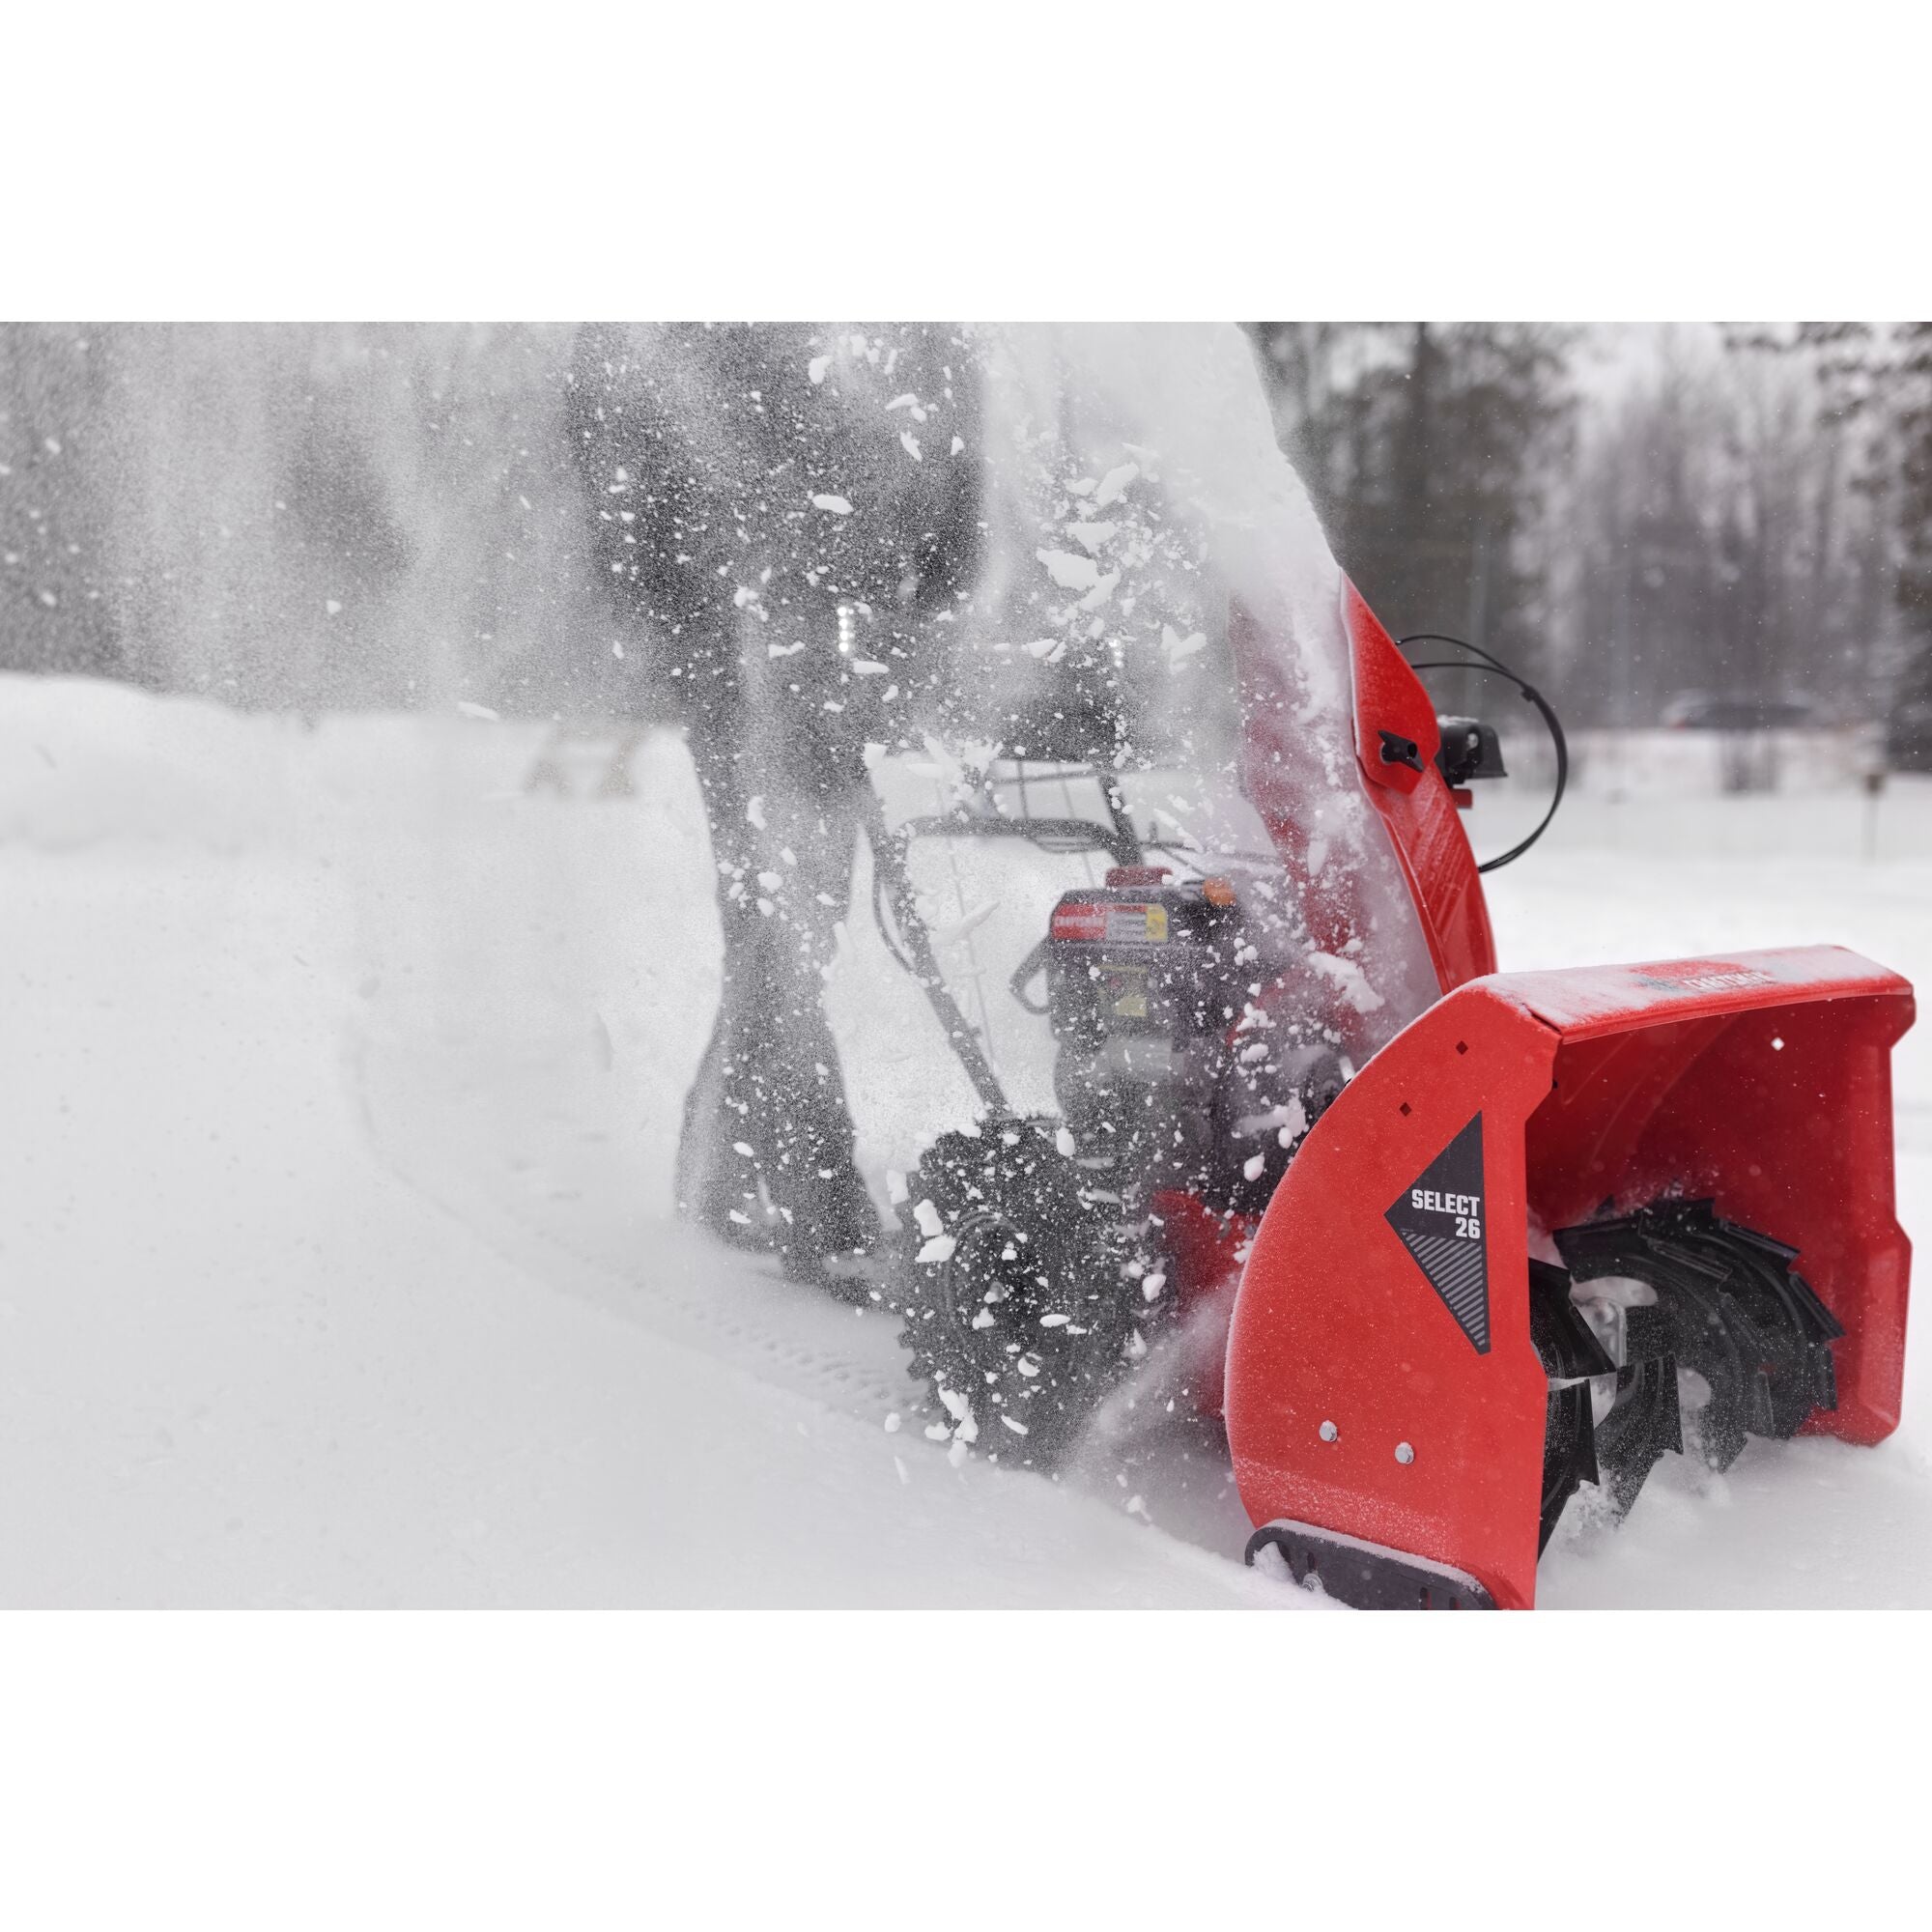 Columbia Columbia 26-inch 243cc Two-Stage Snowblower